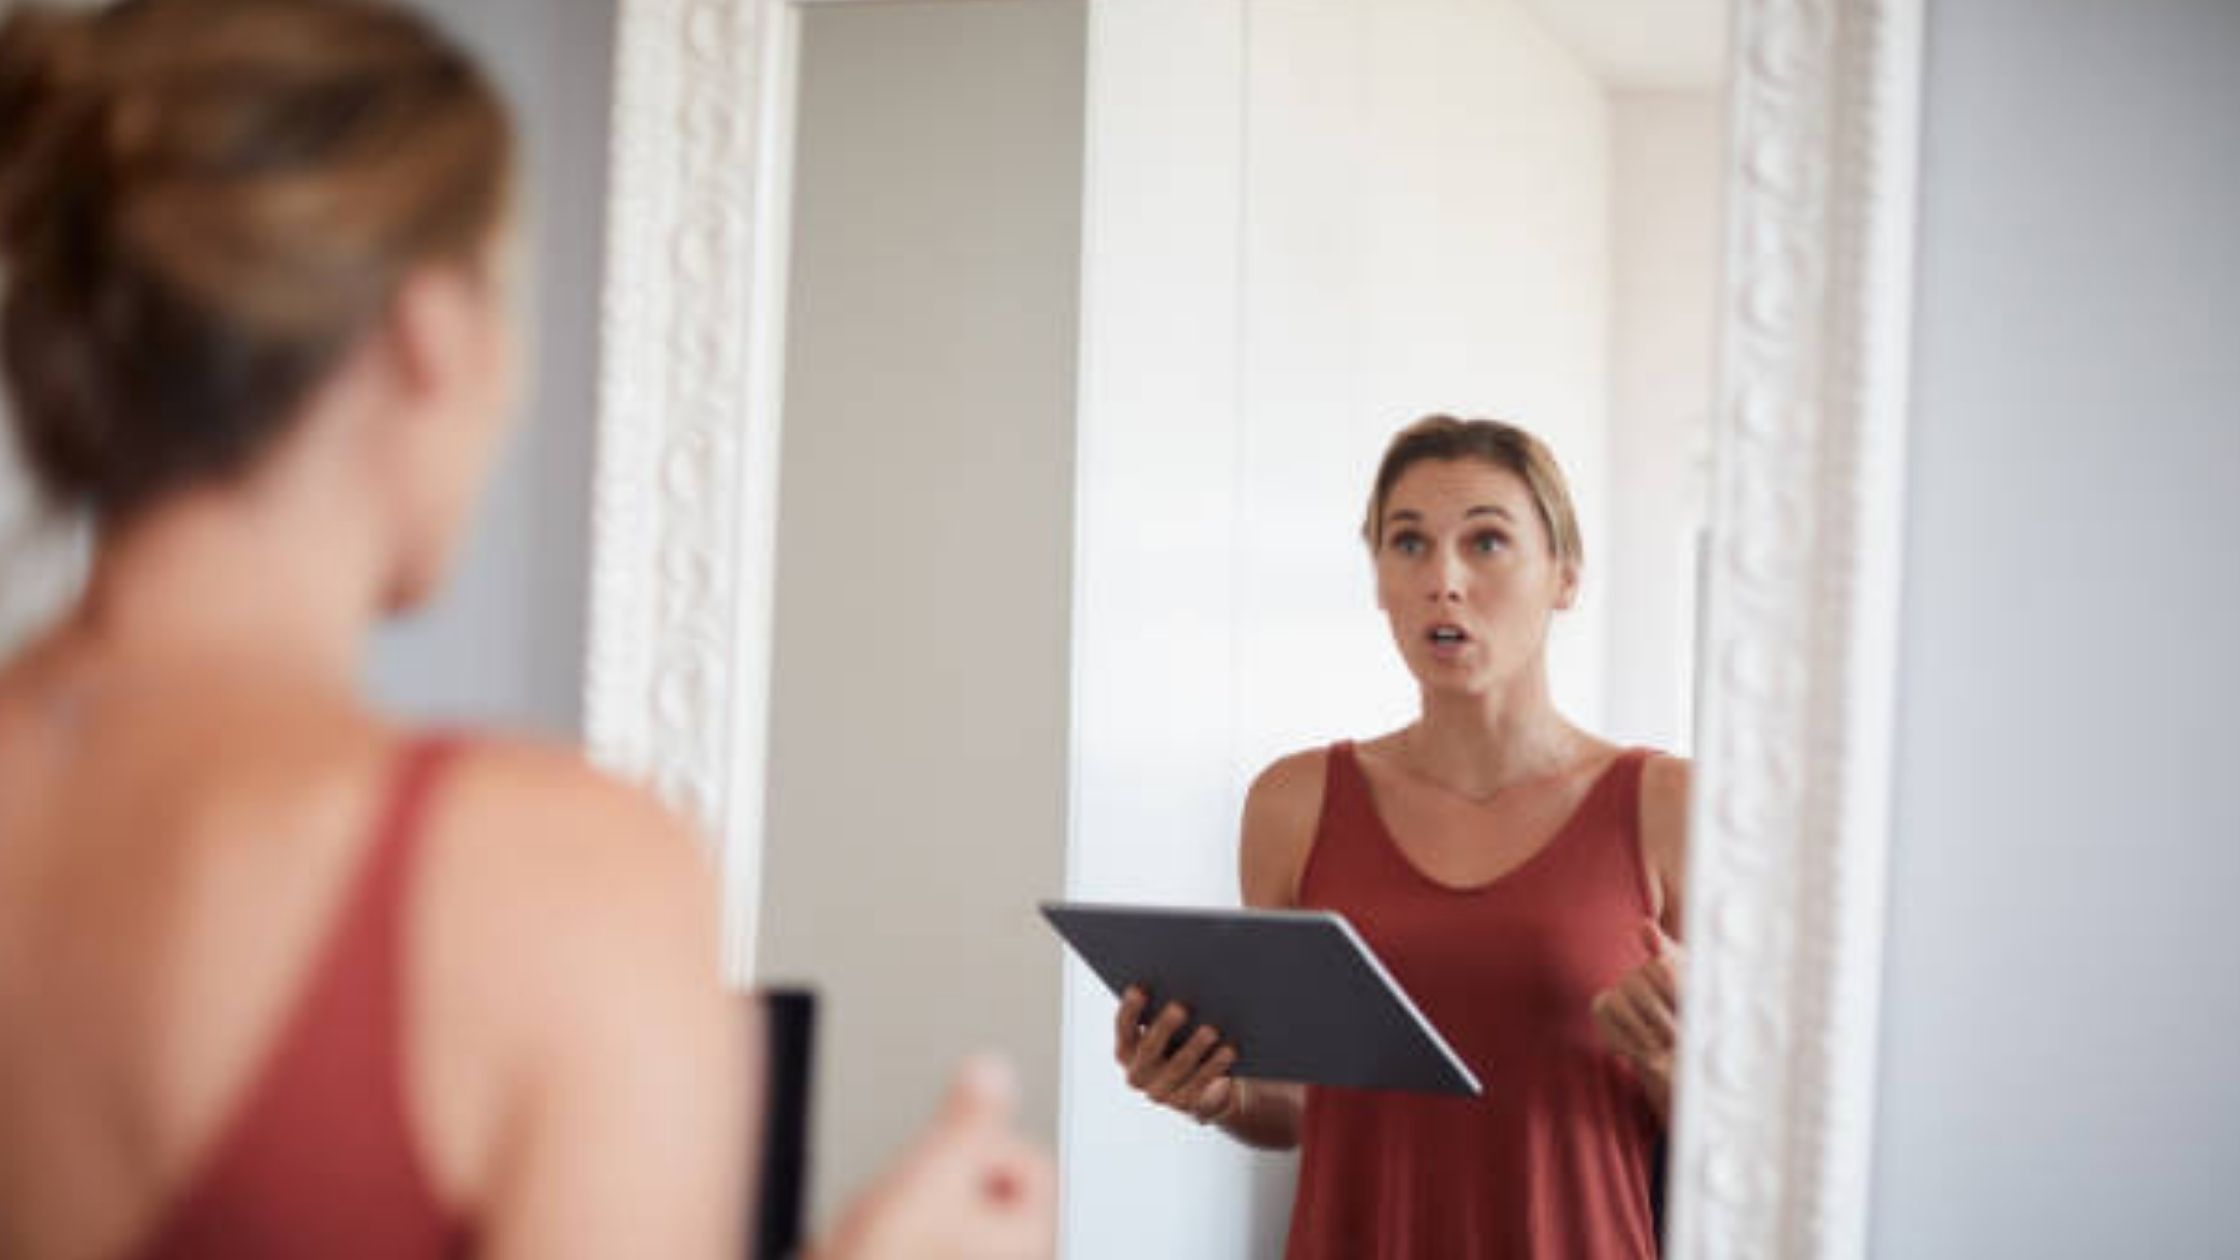 Practice your speech in front of a mirror to get used to the sound of your voice